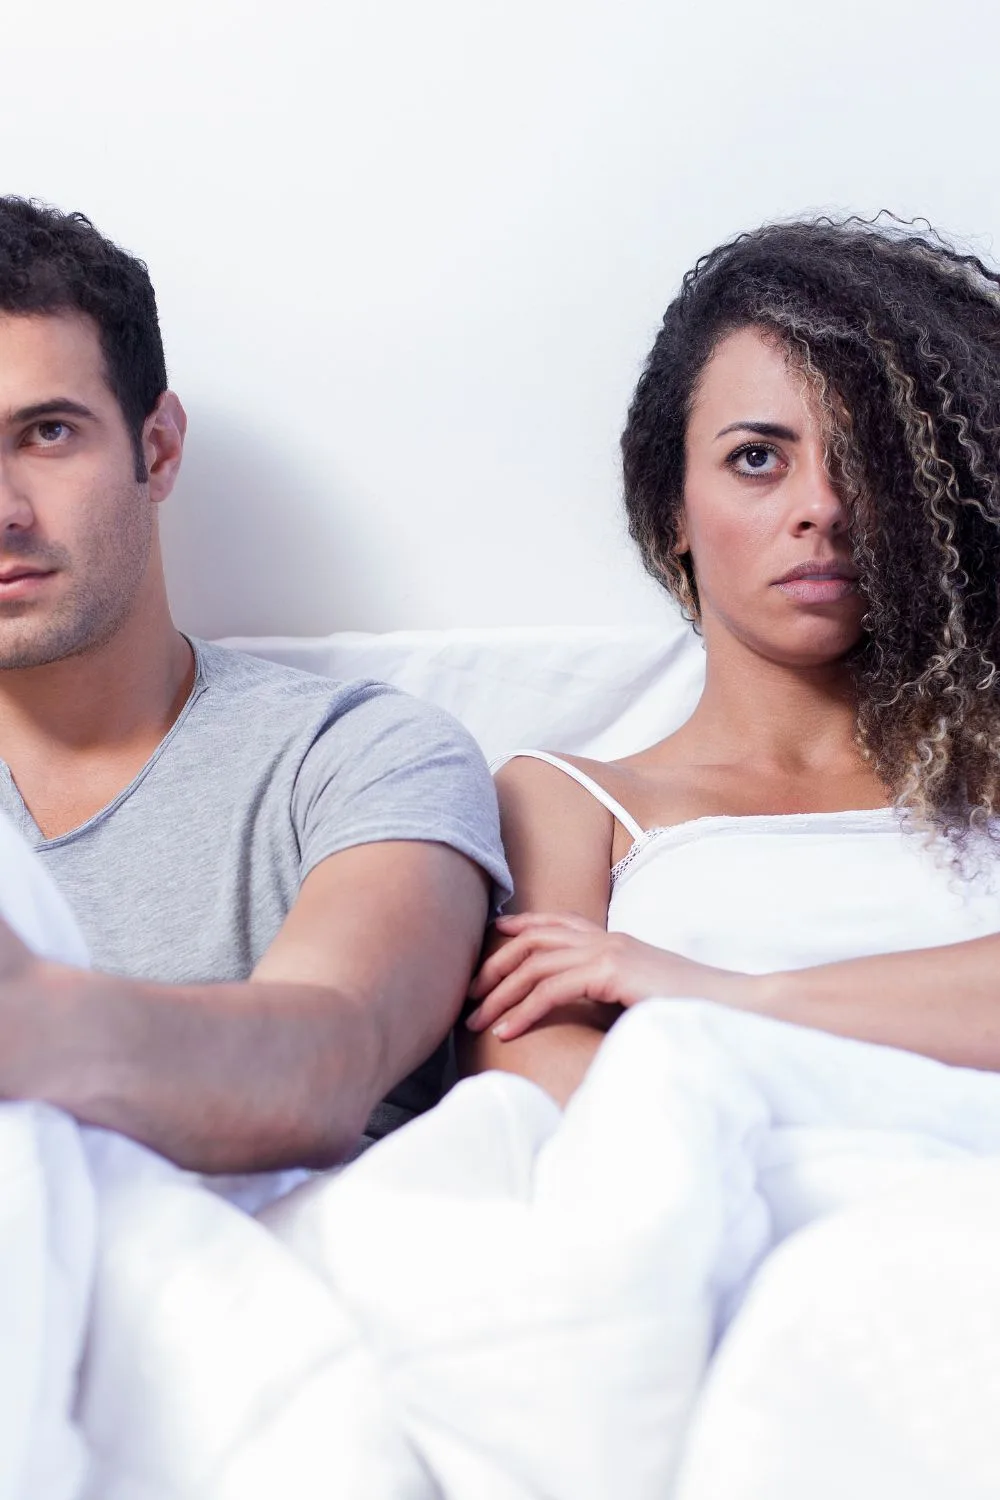 8 Powerful Signs Your Wife Is Bored In Bed